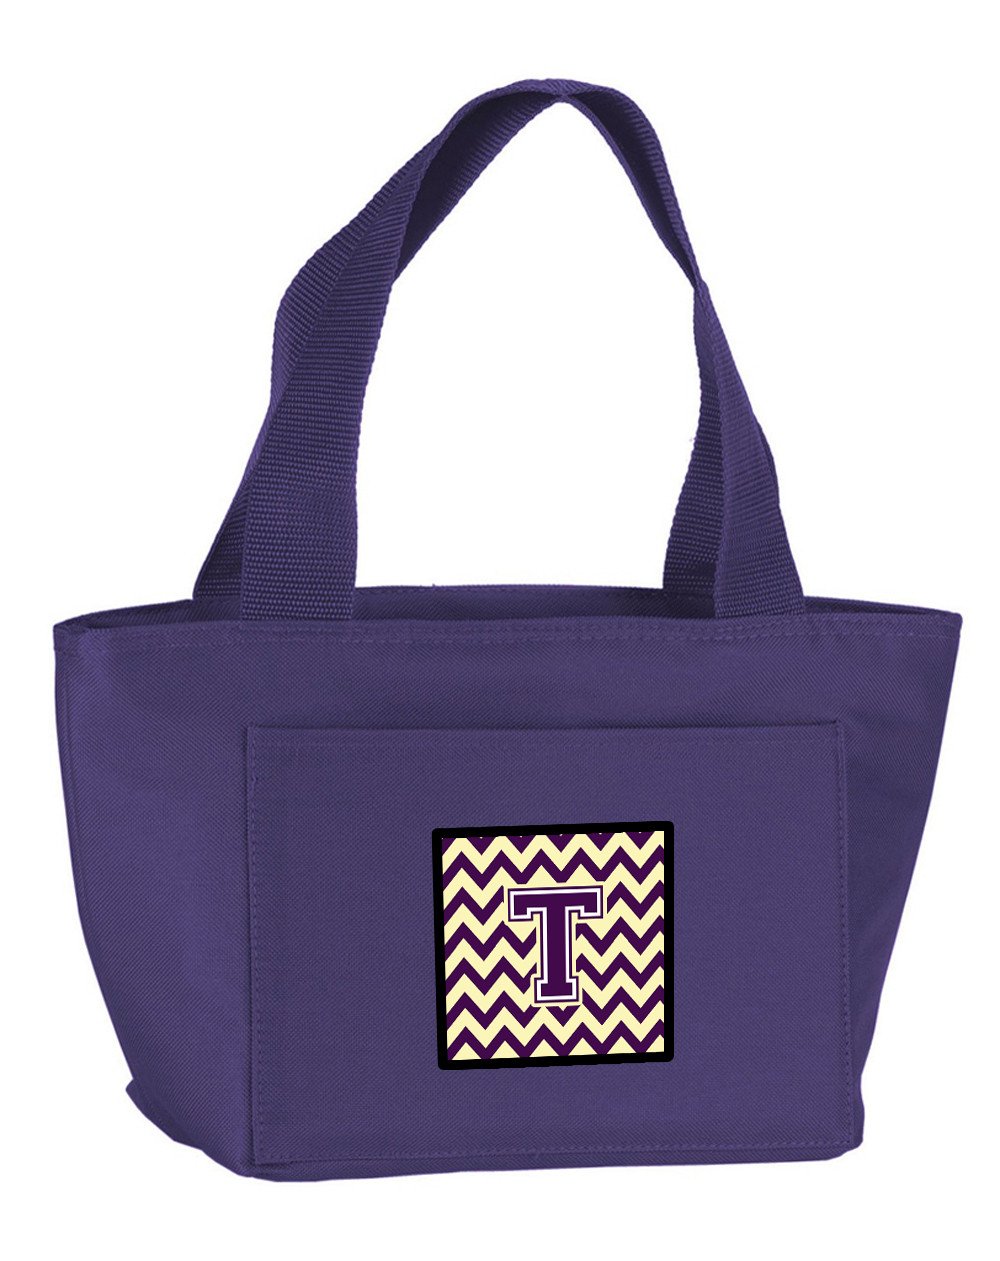 Letter T Chevron Purple and Gold Lunch Bag CJ1058-TPR-8808 by Caroline's Treasures